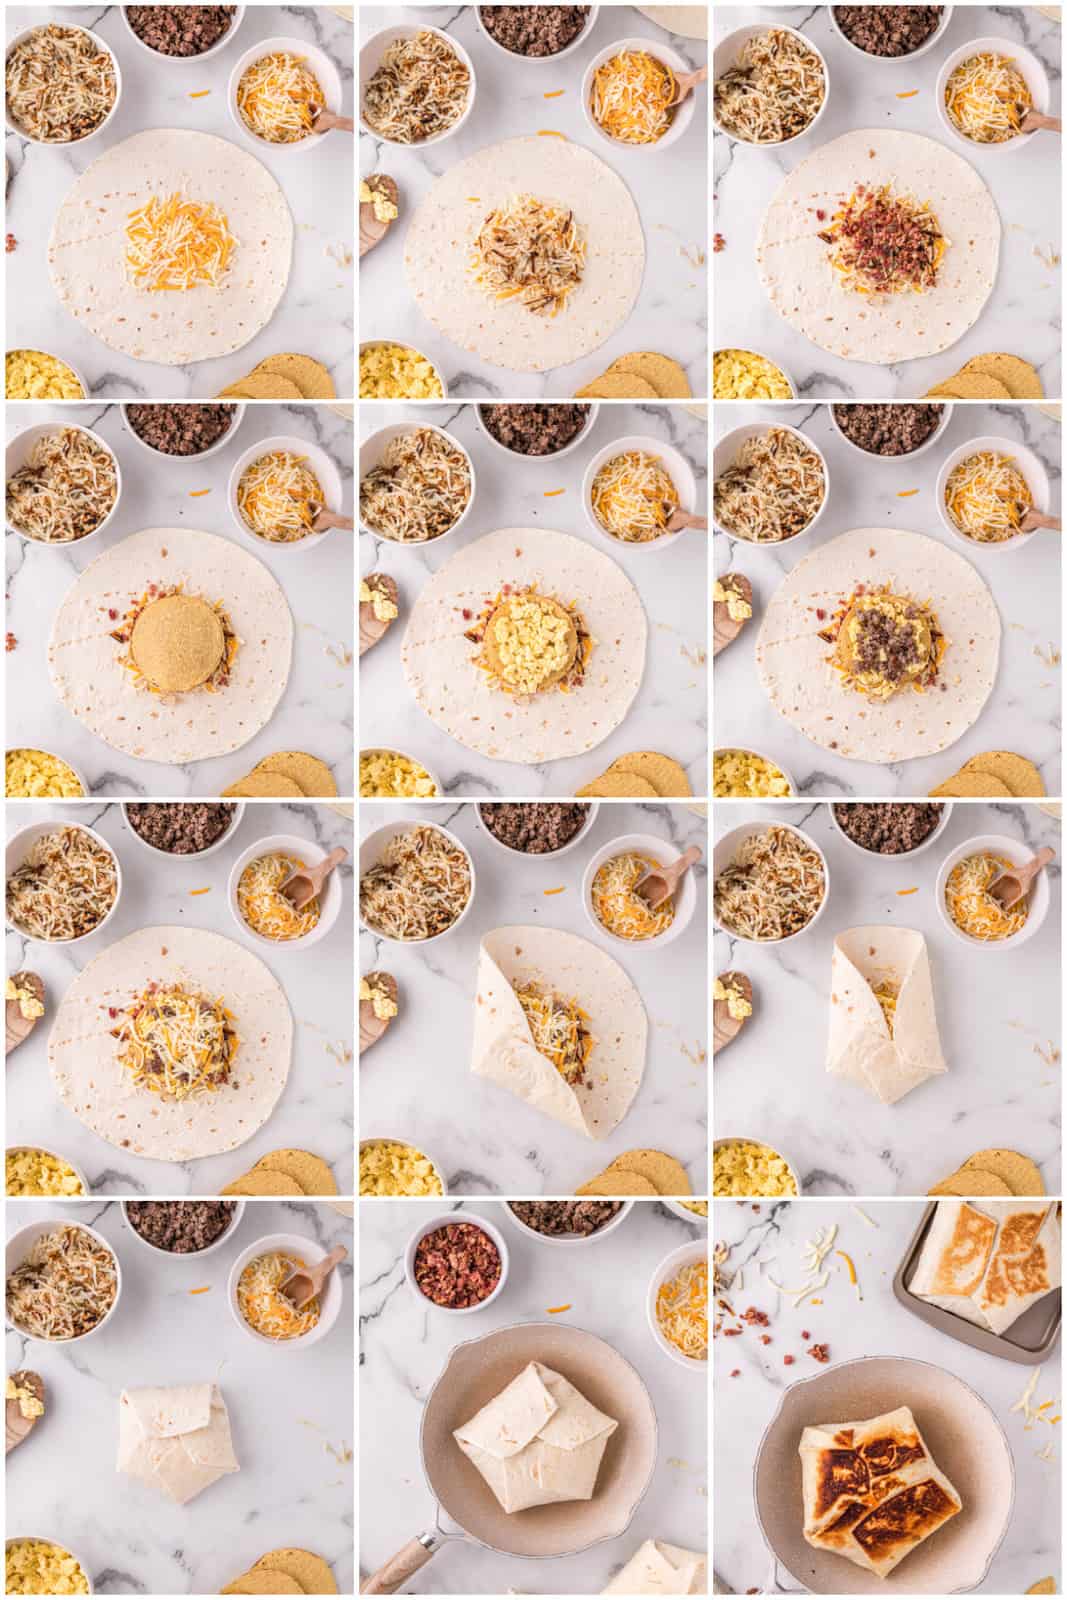 Step by step photos on how to make a Breakfast Crunchwrap.